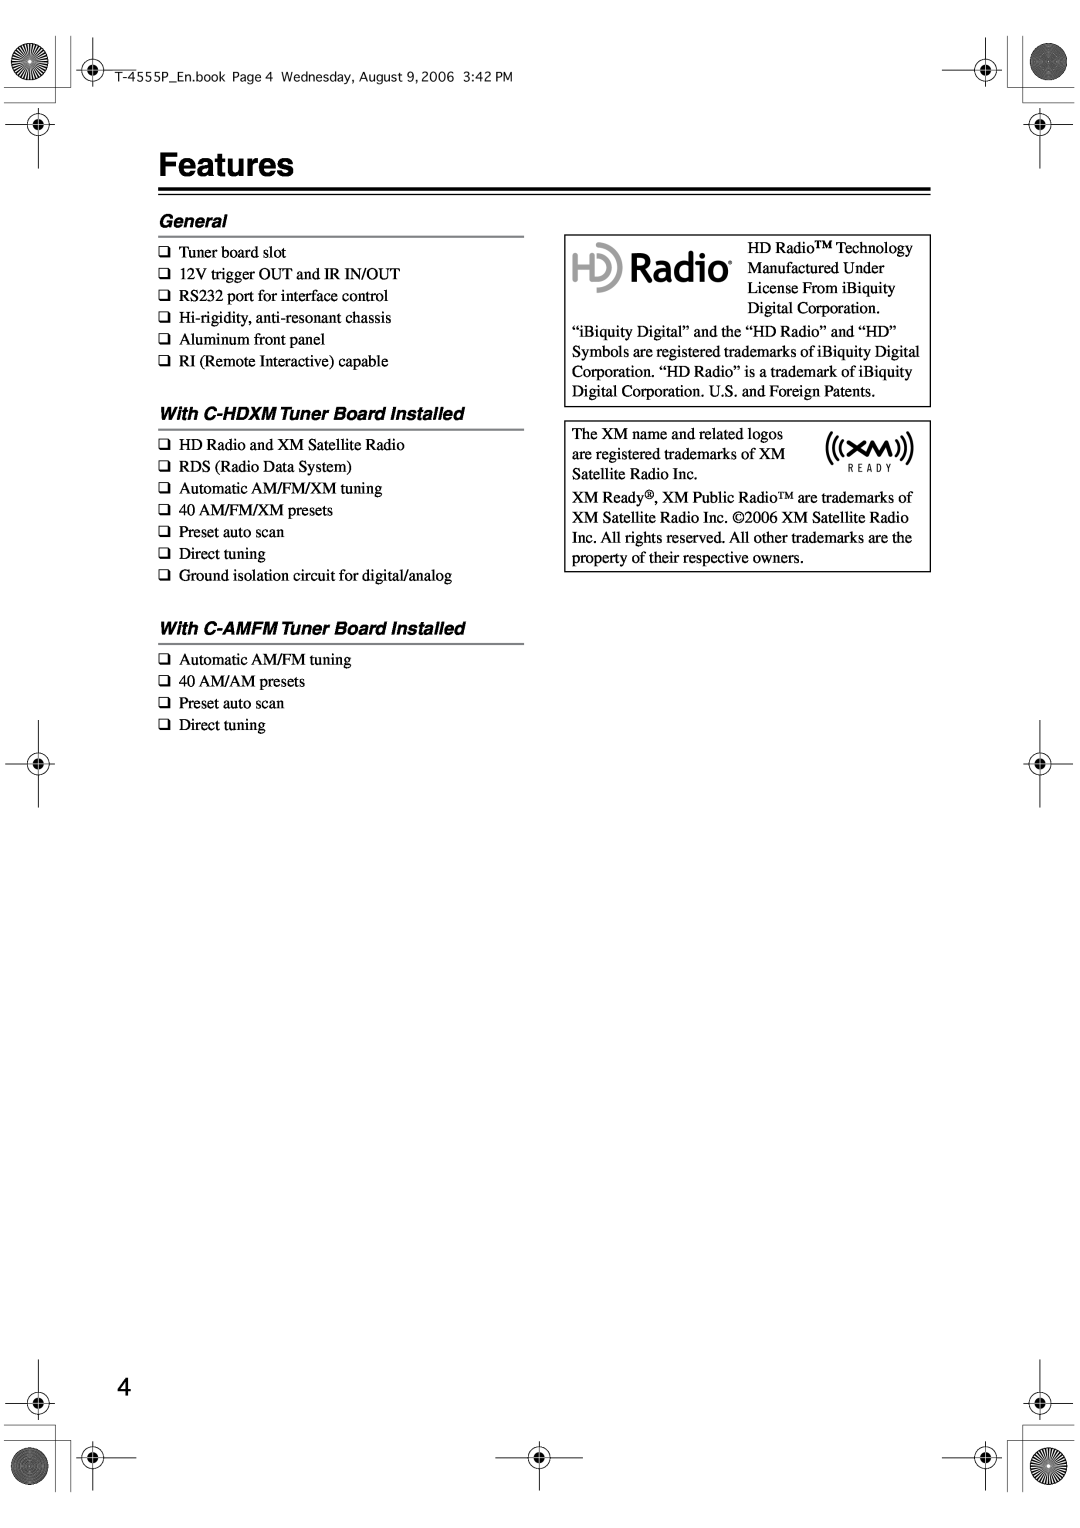 Onkyo T-4555P instruction manual Features, General, With C-HDXMTuner Board Installed, With C-AMFMTuner Board Installed 